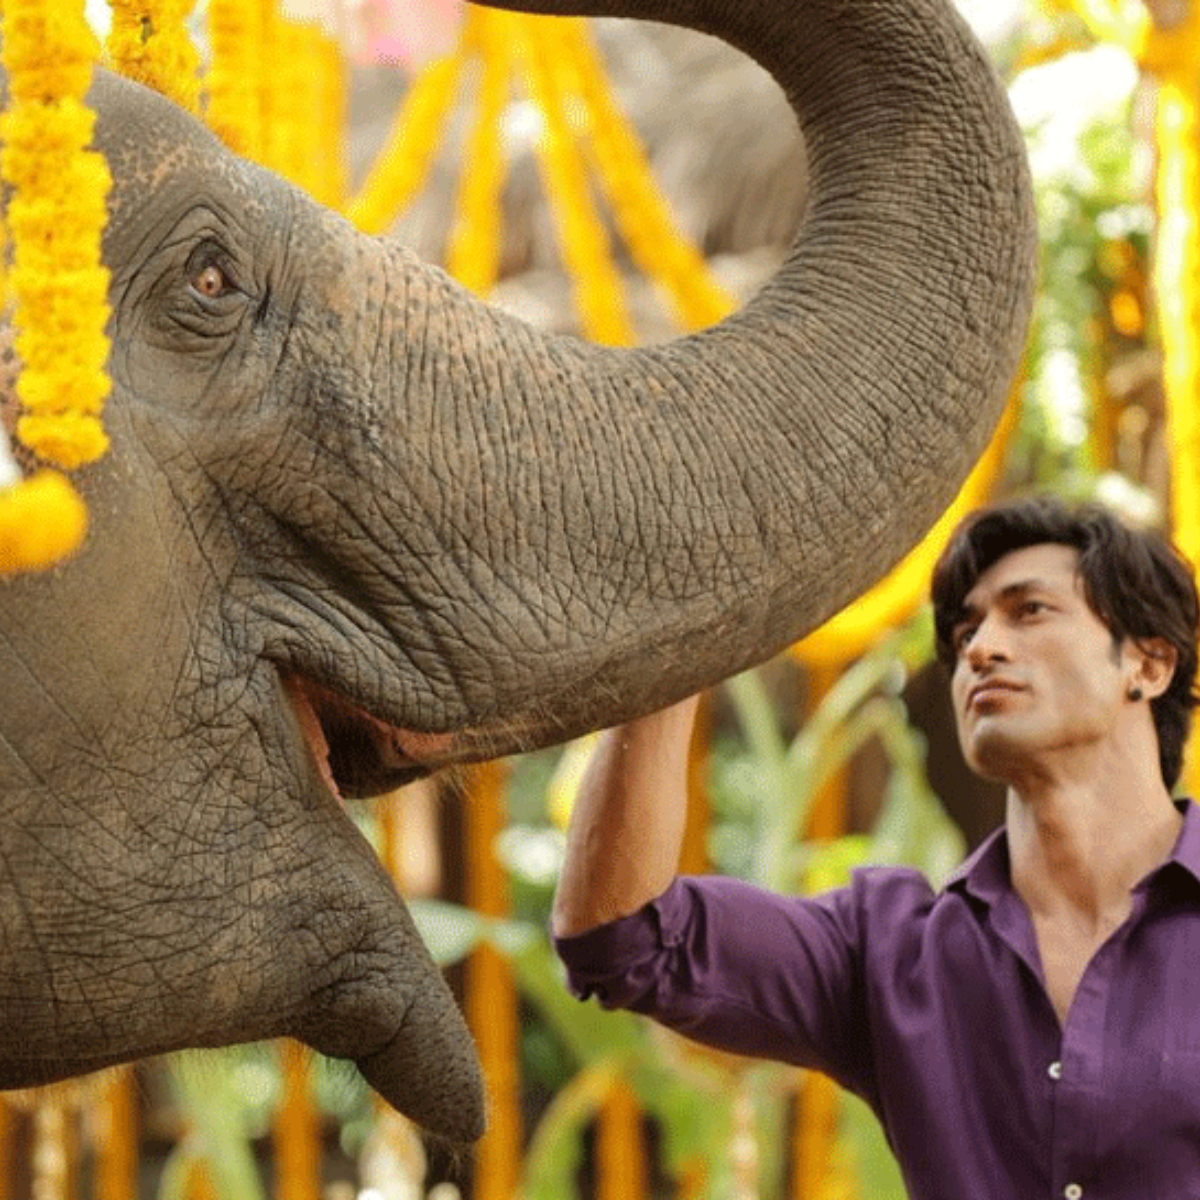 Junglee Movie Review: Chuck Russell's Bollywood directorial debut with Vidyut Jammwal falls flat